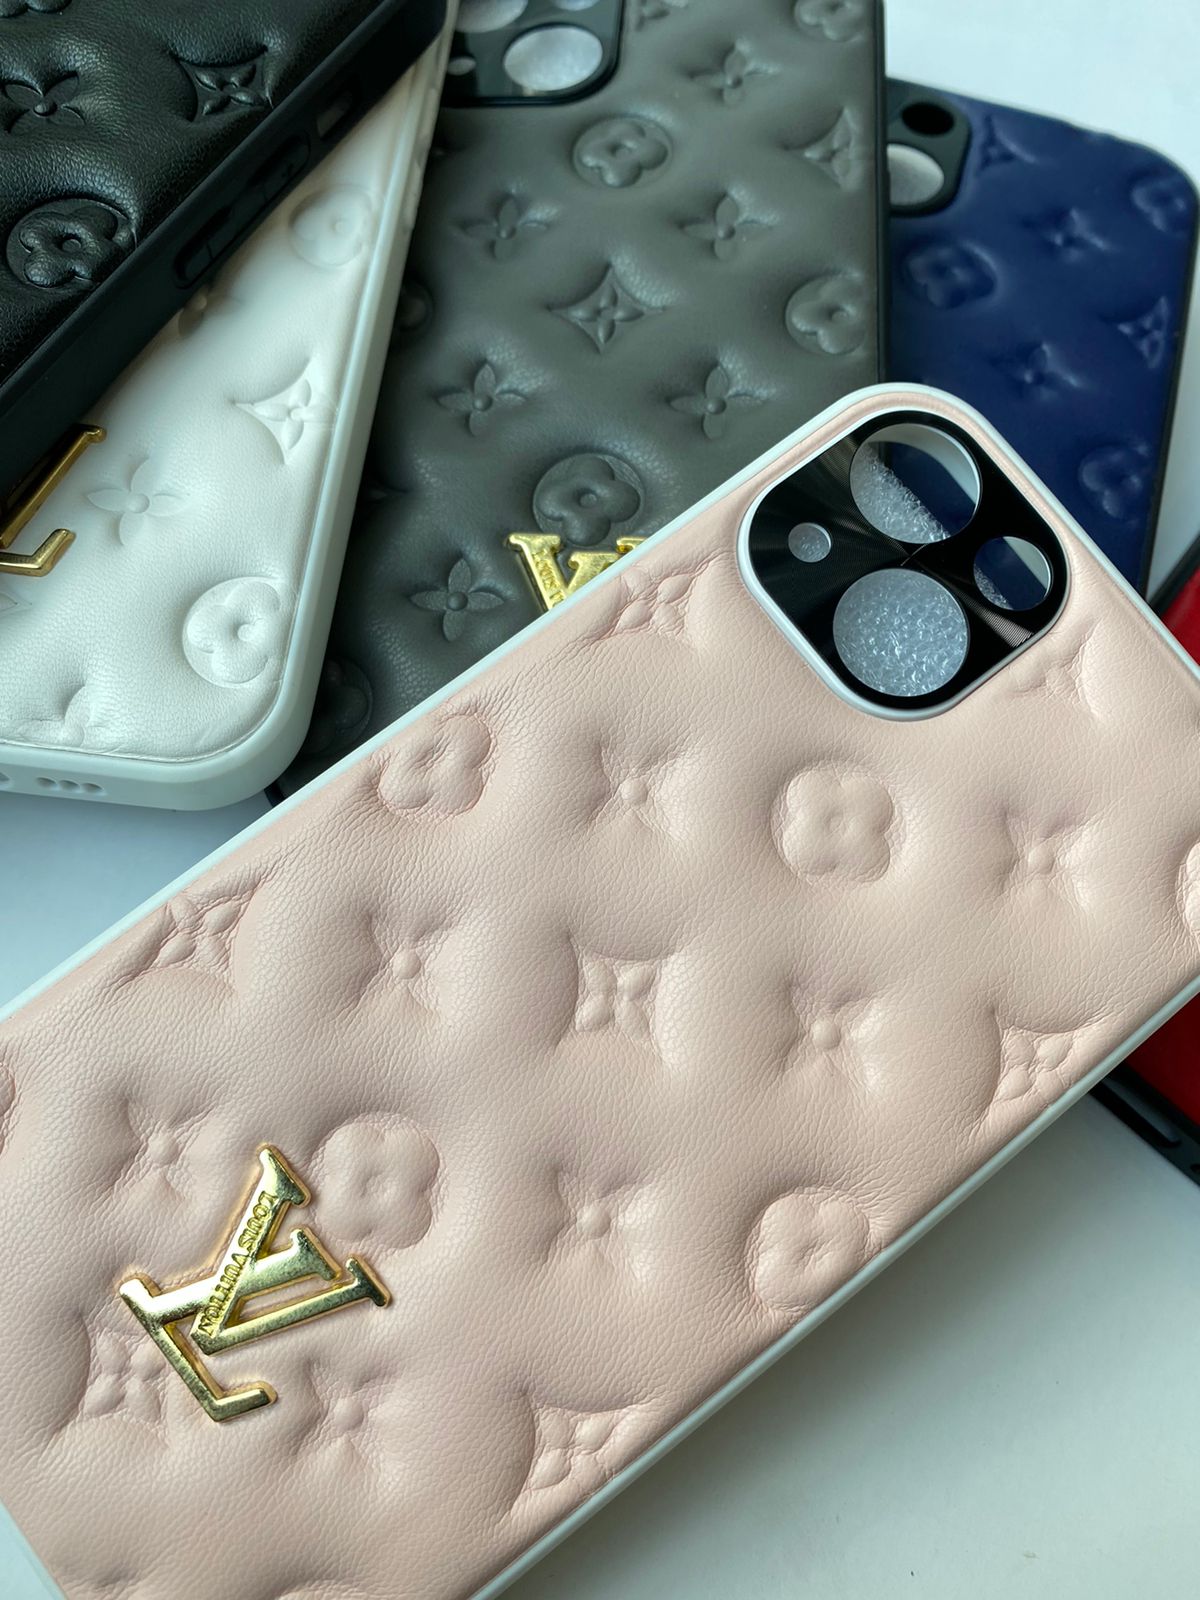 Soft LV Leather Back Case Cover For Iphone 11